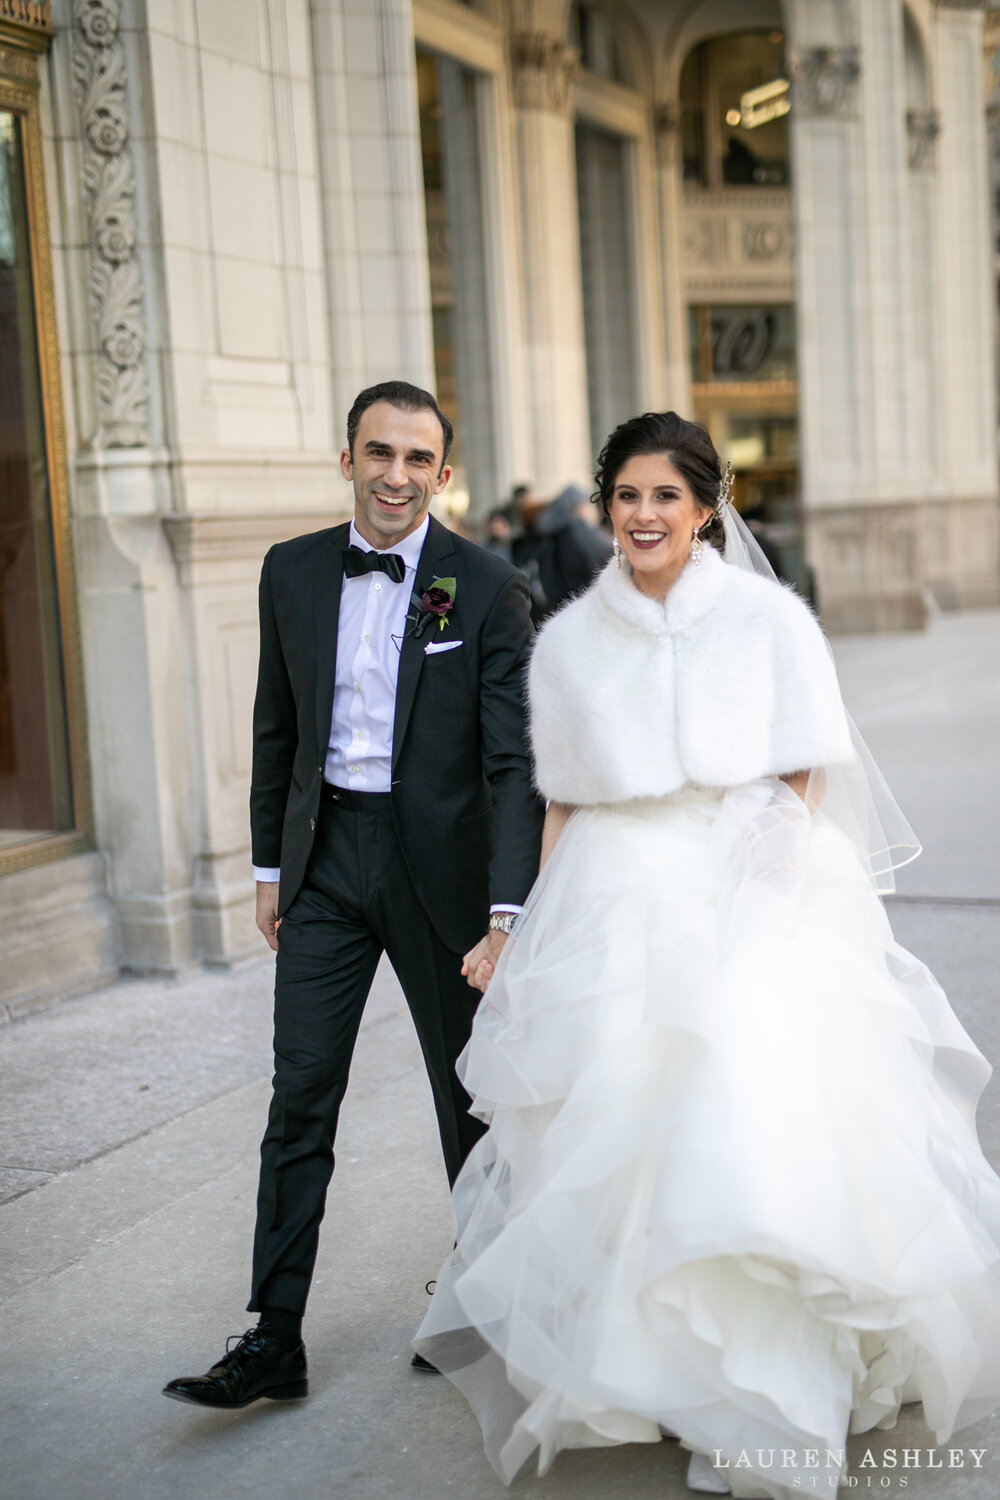 intercontinental-chicago-high-end-michigan-ave-magnificent-mile-wedding-chicago-wedding-photography-66.jpg